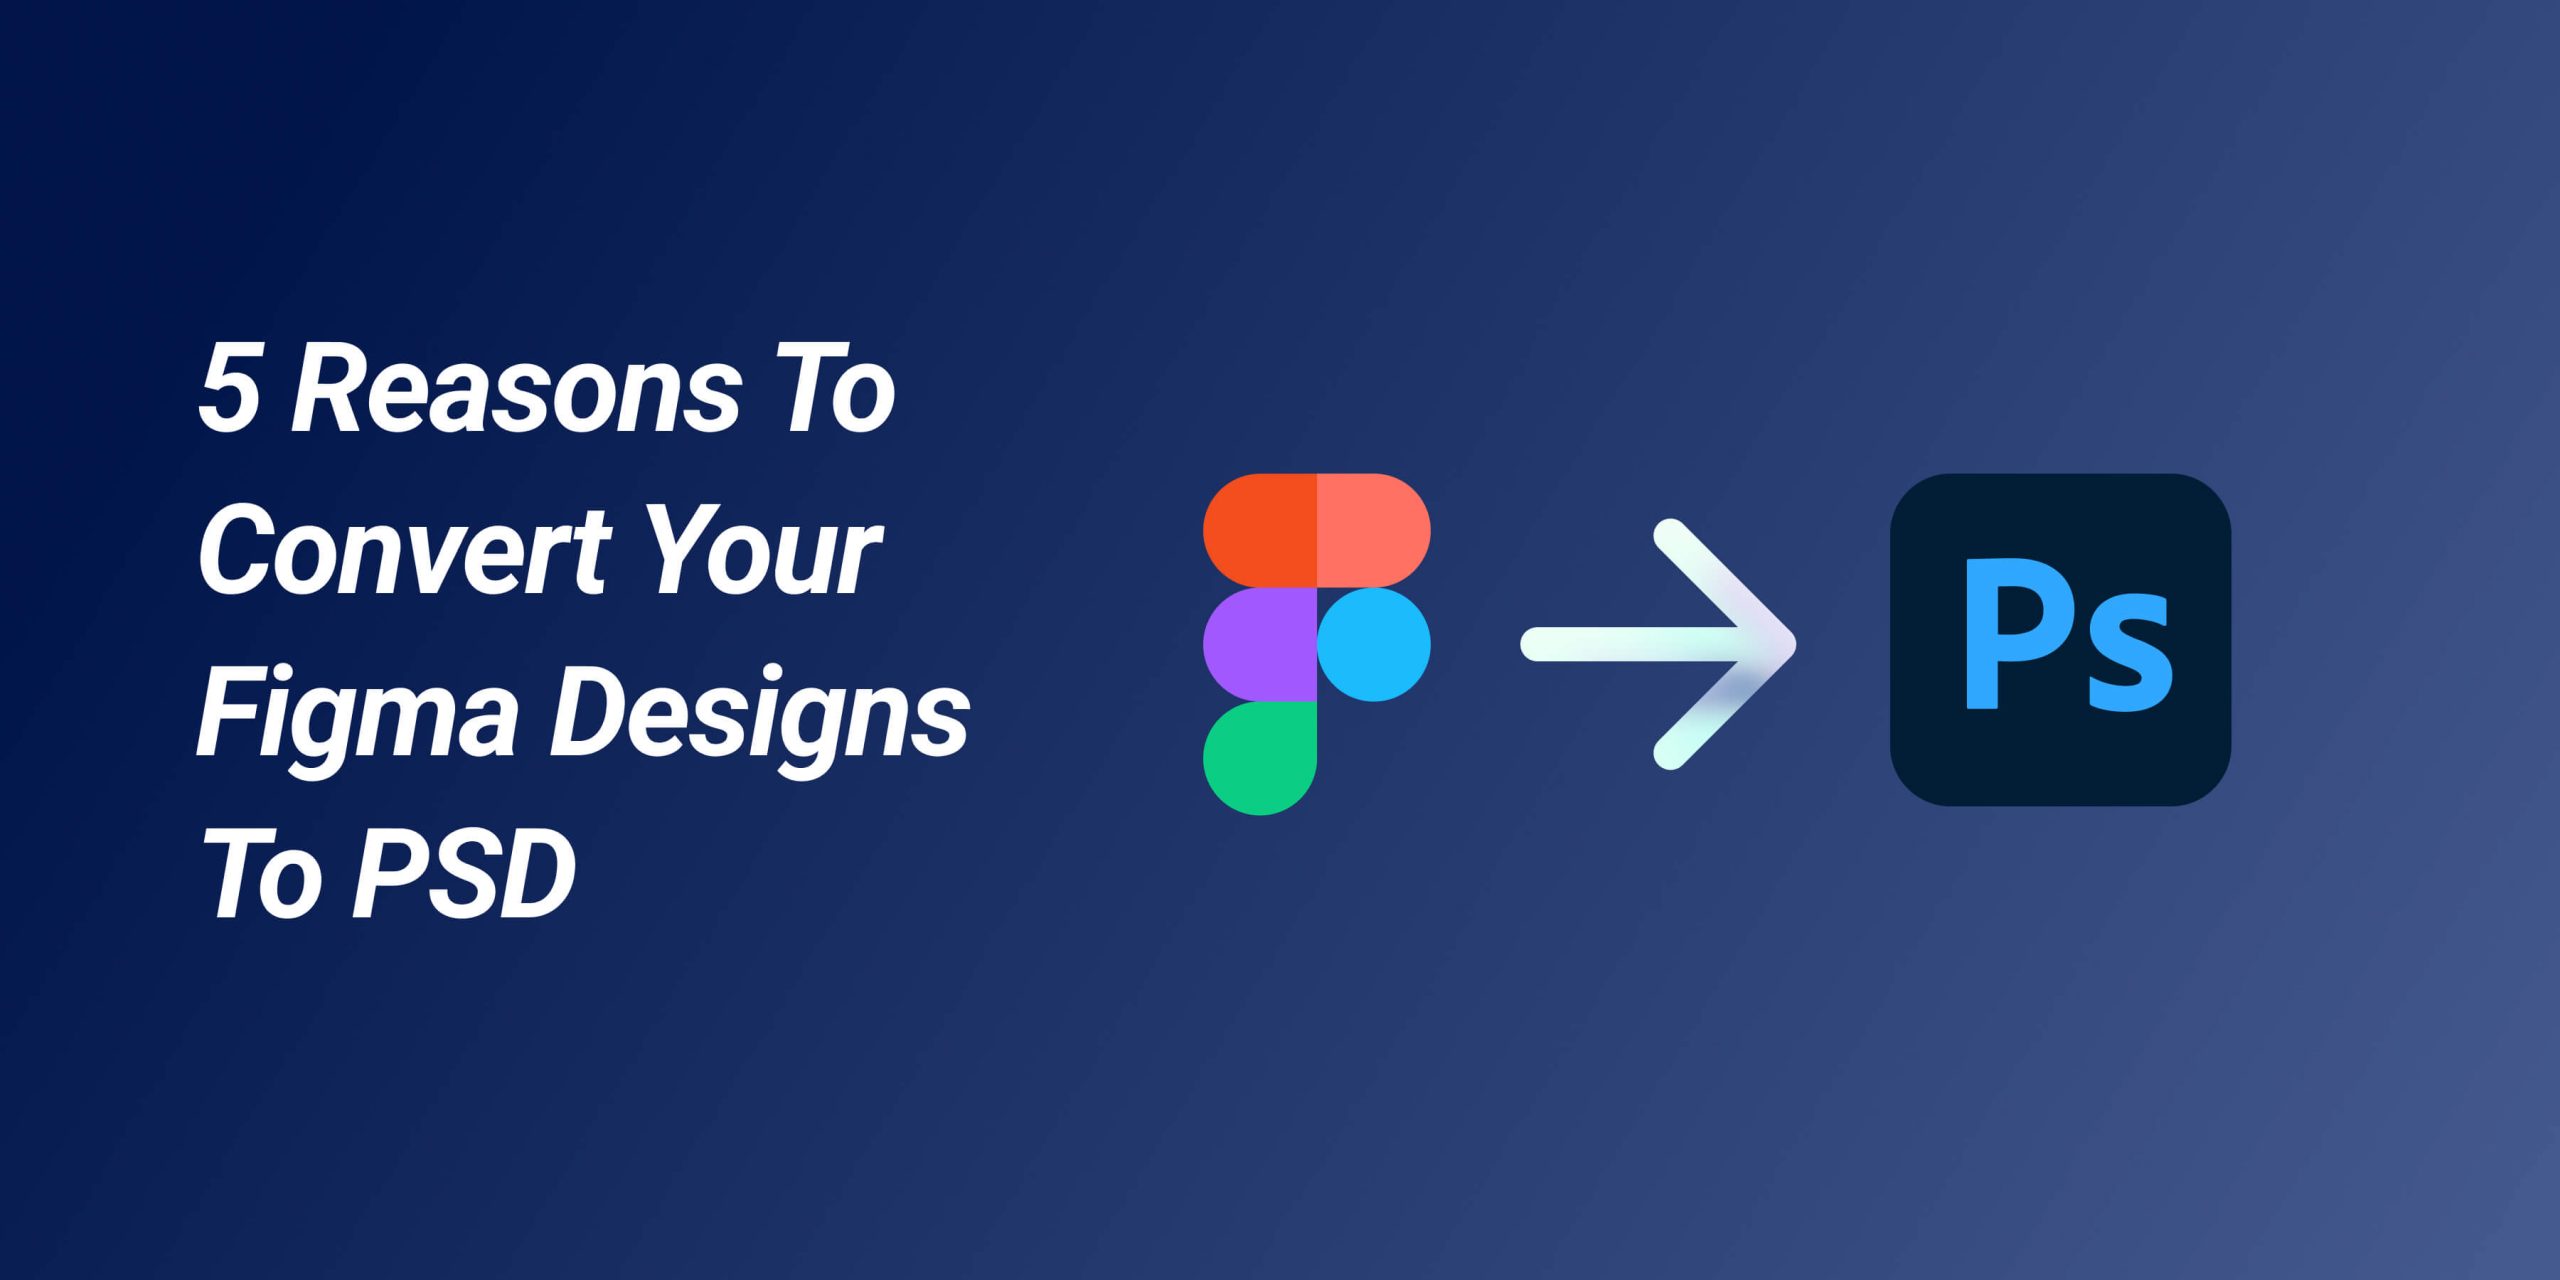 5 Reasons to Convert Your Figma Designs to PSD